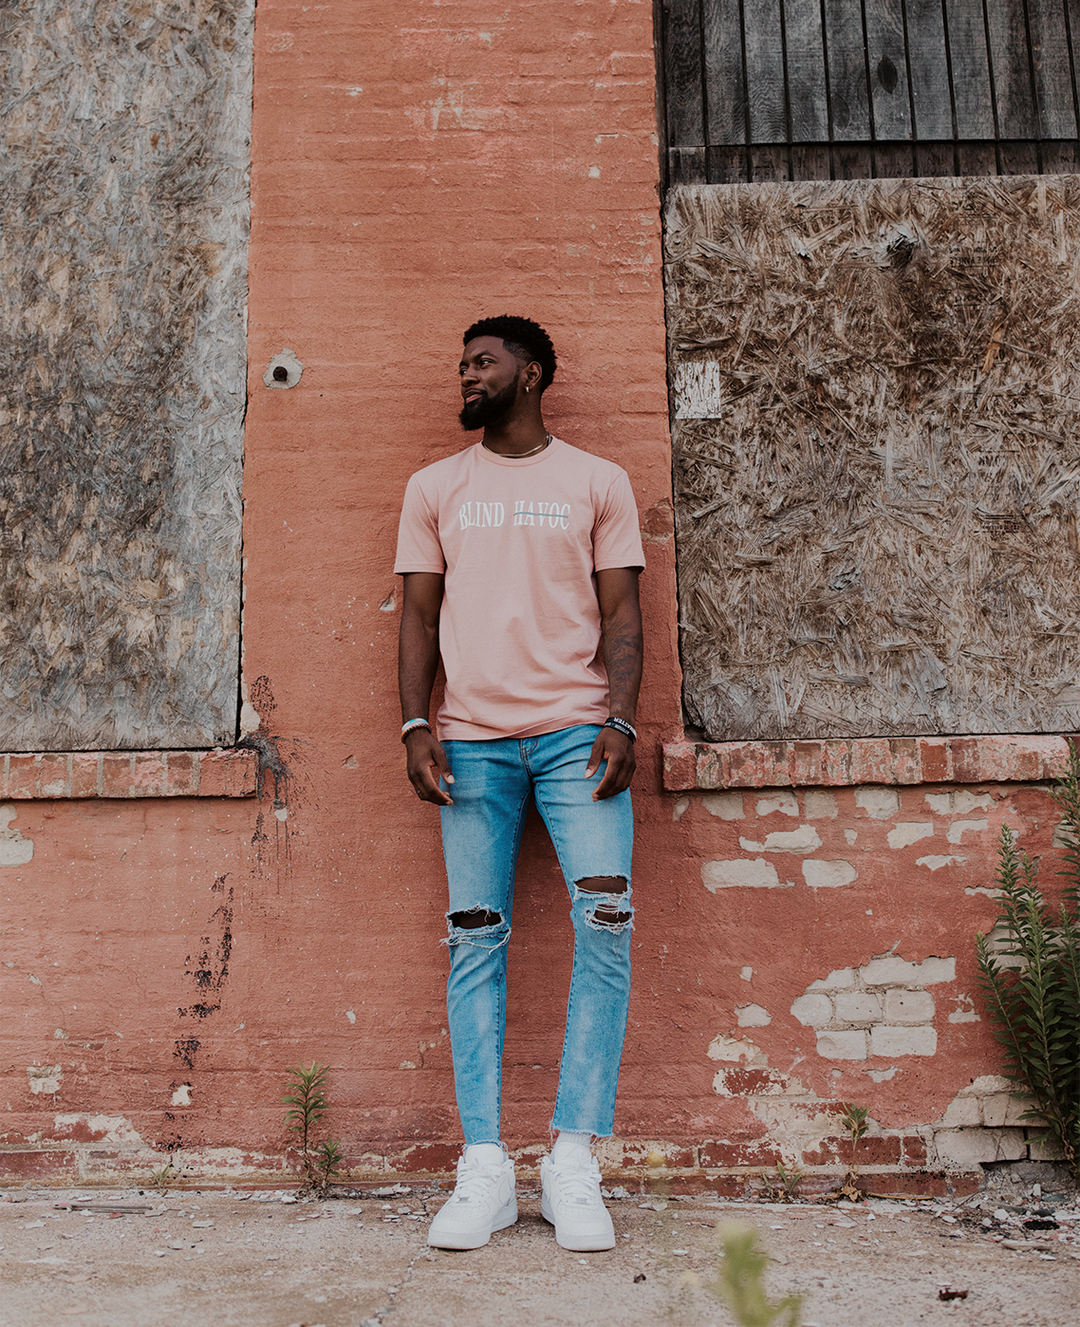 Love Over Hate Tee [Pink]